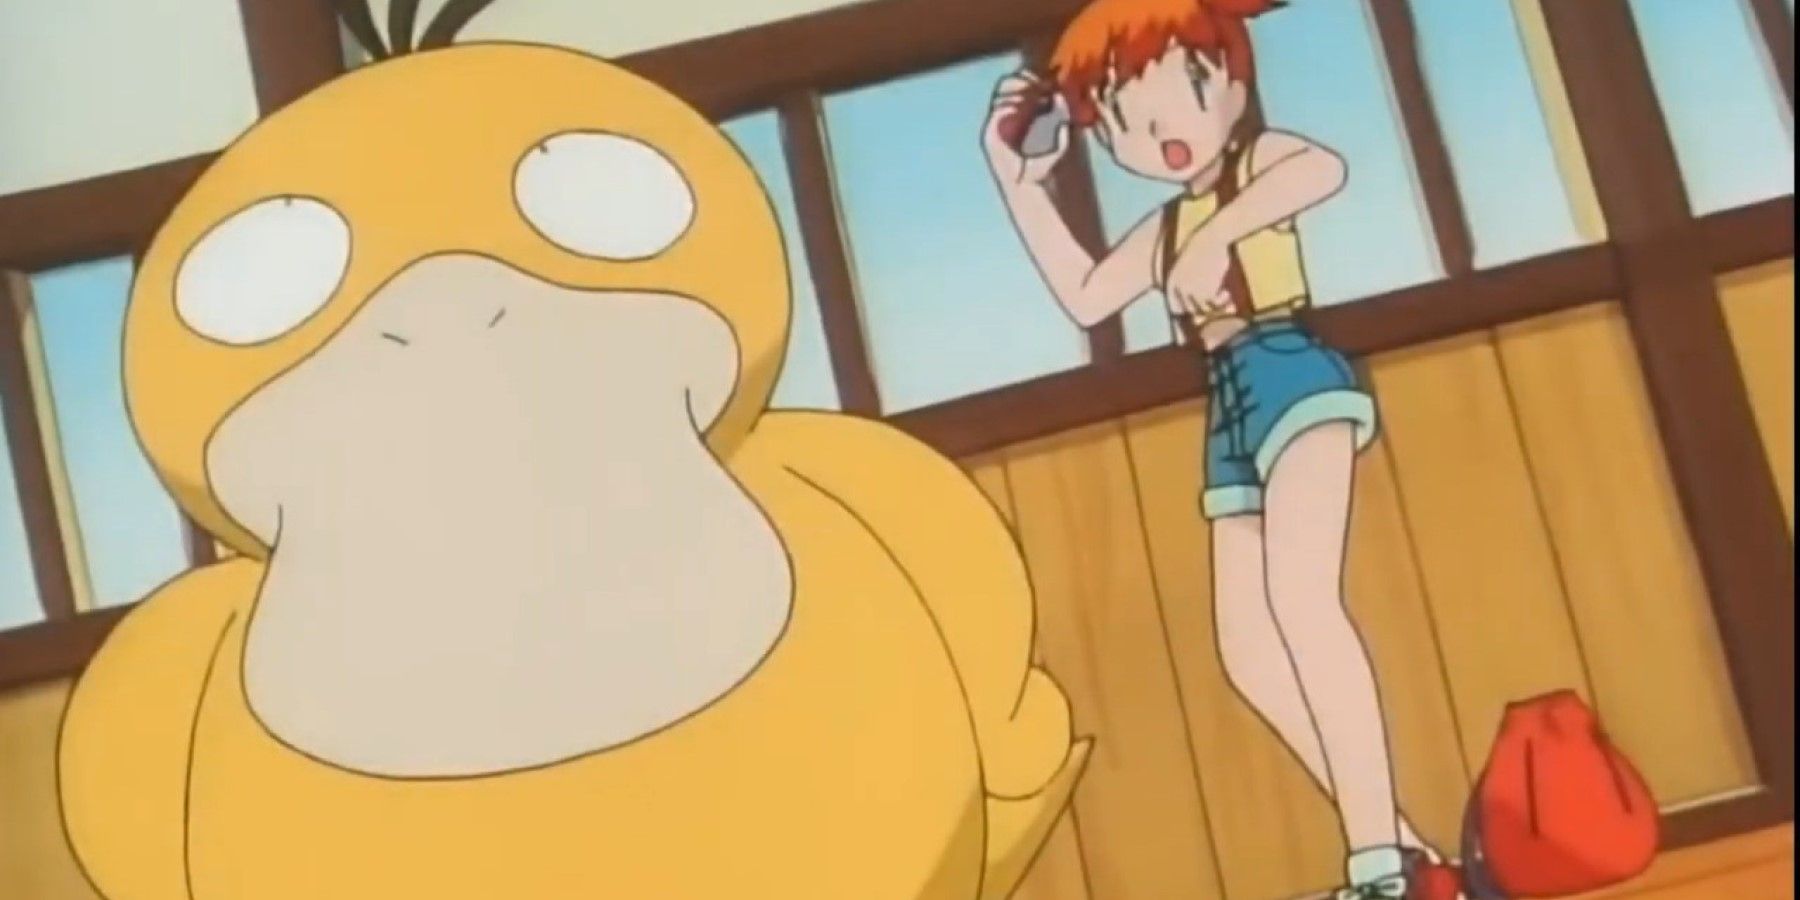 All the Pokemon Misty Catches in the Anime